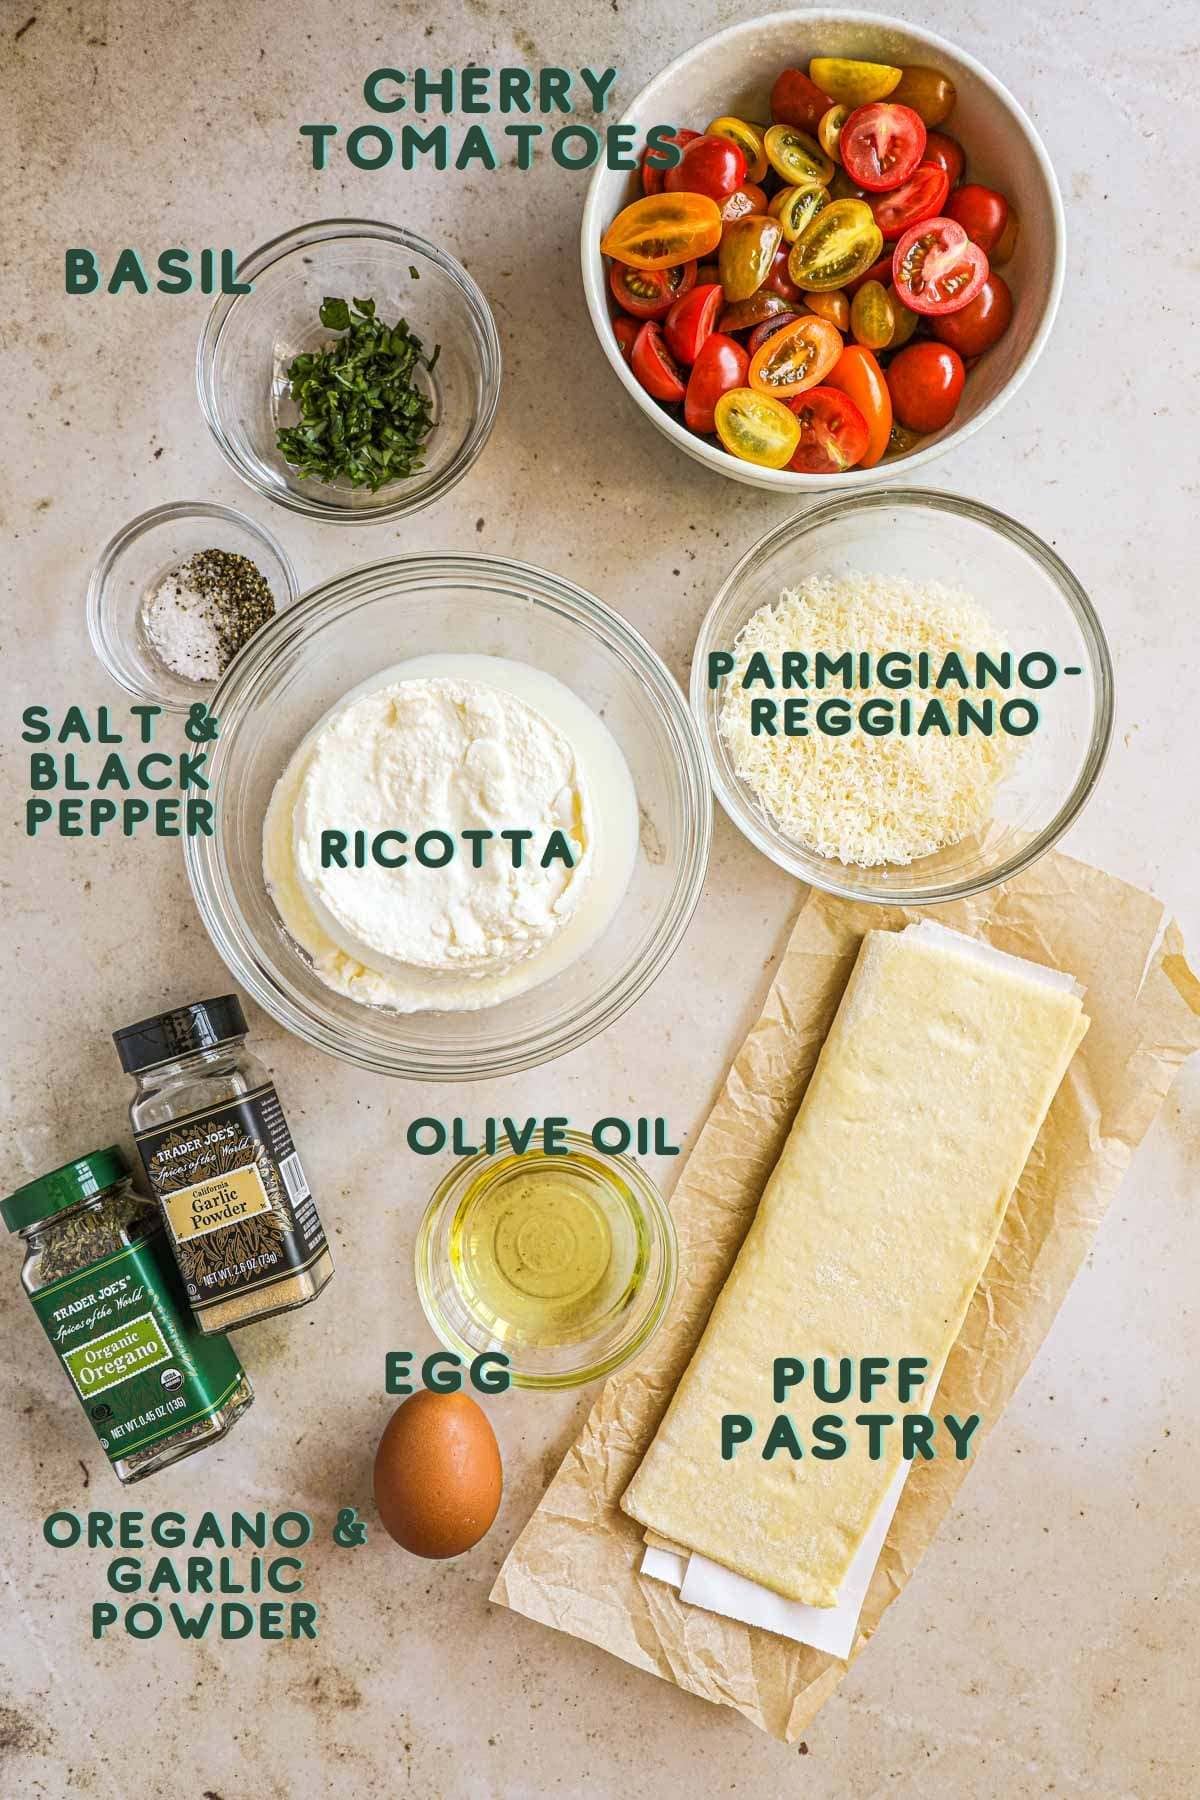 Ingredients to make tomato tartlets with puff pastry.